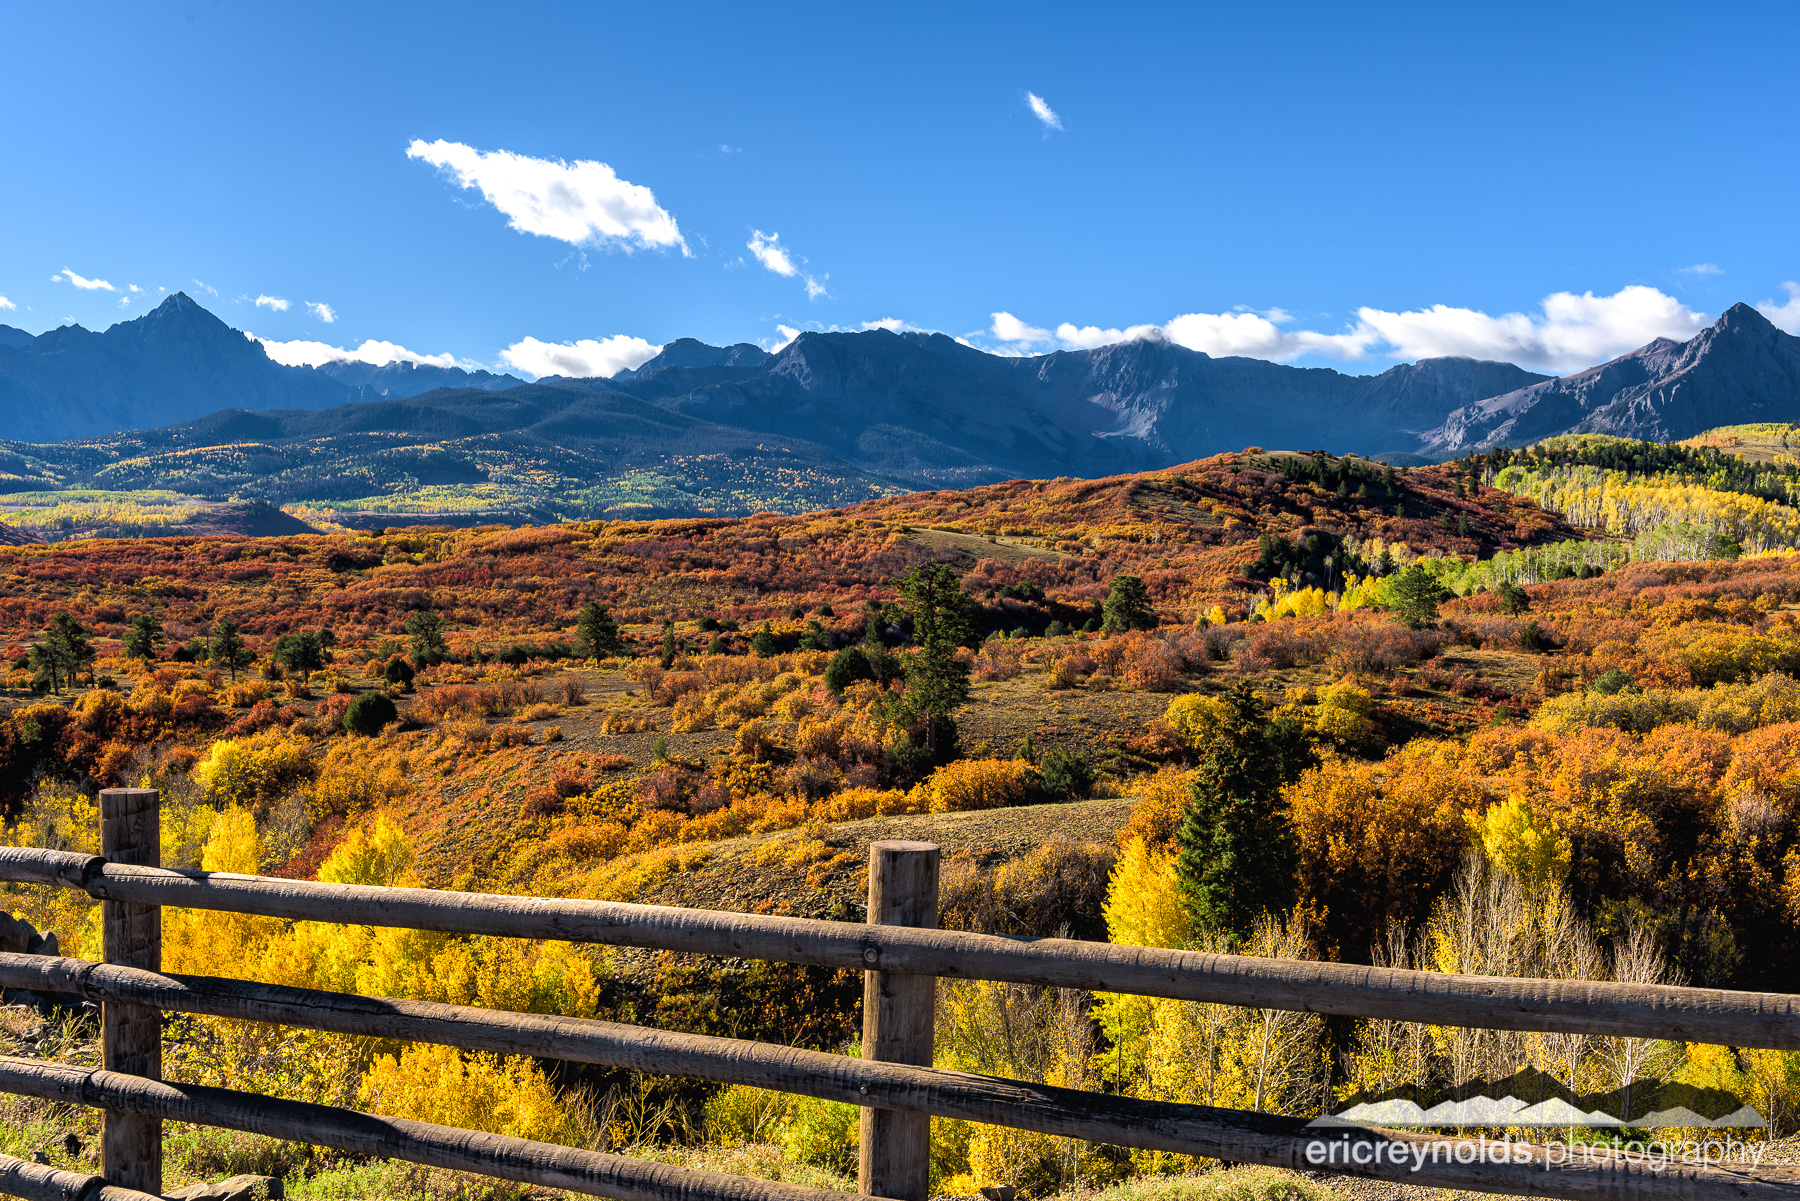 Dallas Divide with Fall Colors by Eric Reynolds - Landscape Photographer